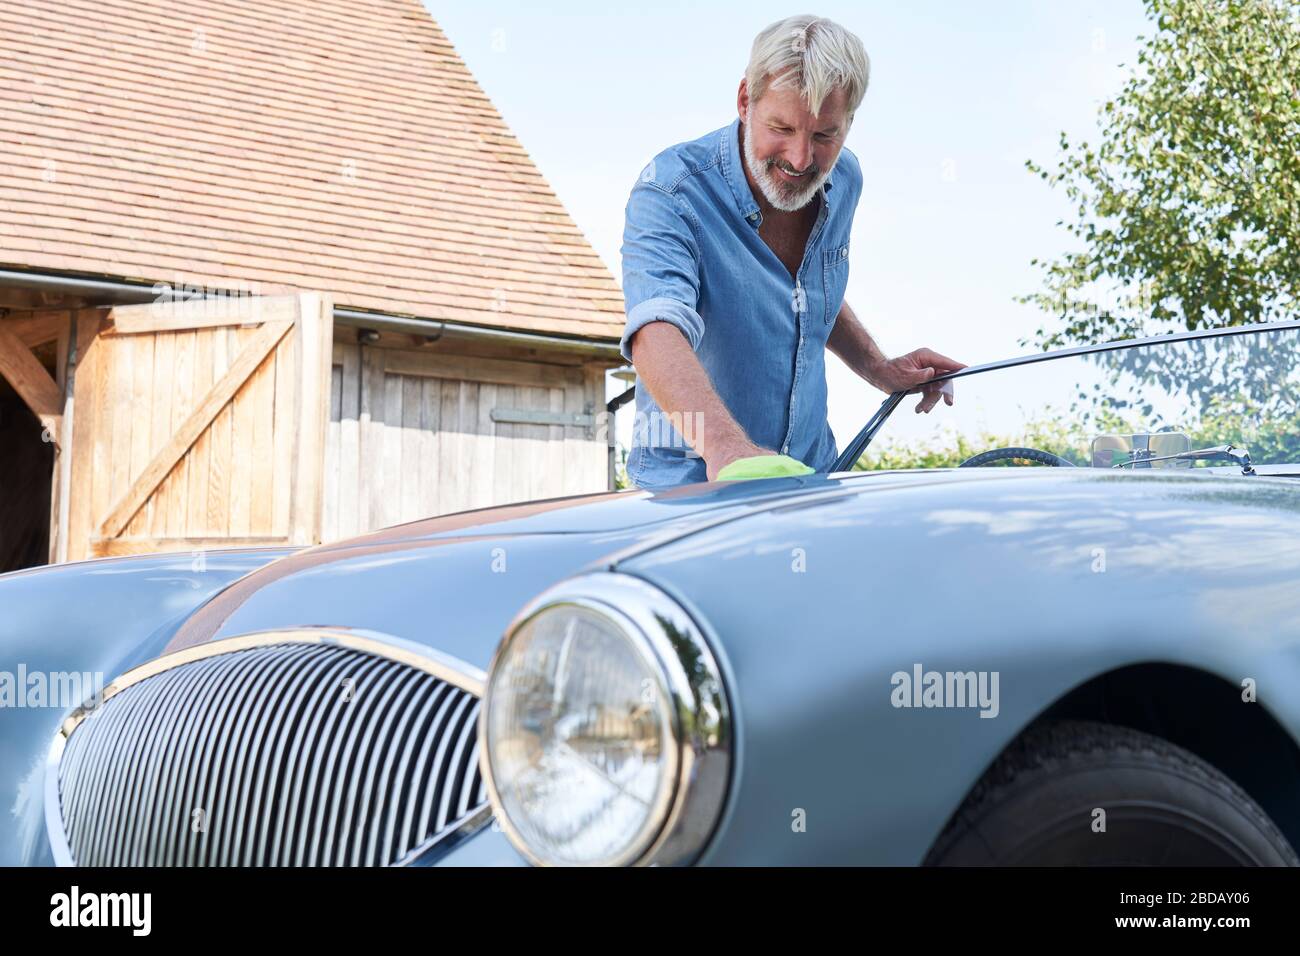 Mature Man Polishing Restored Classic Sports Car Outdoors At Home Stock Photo